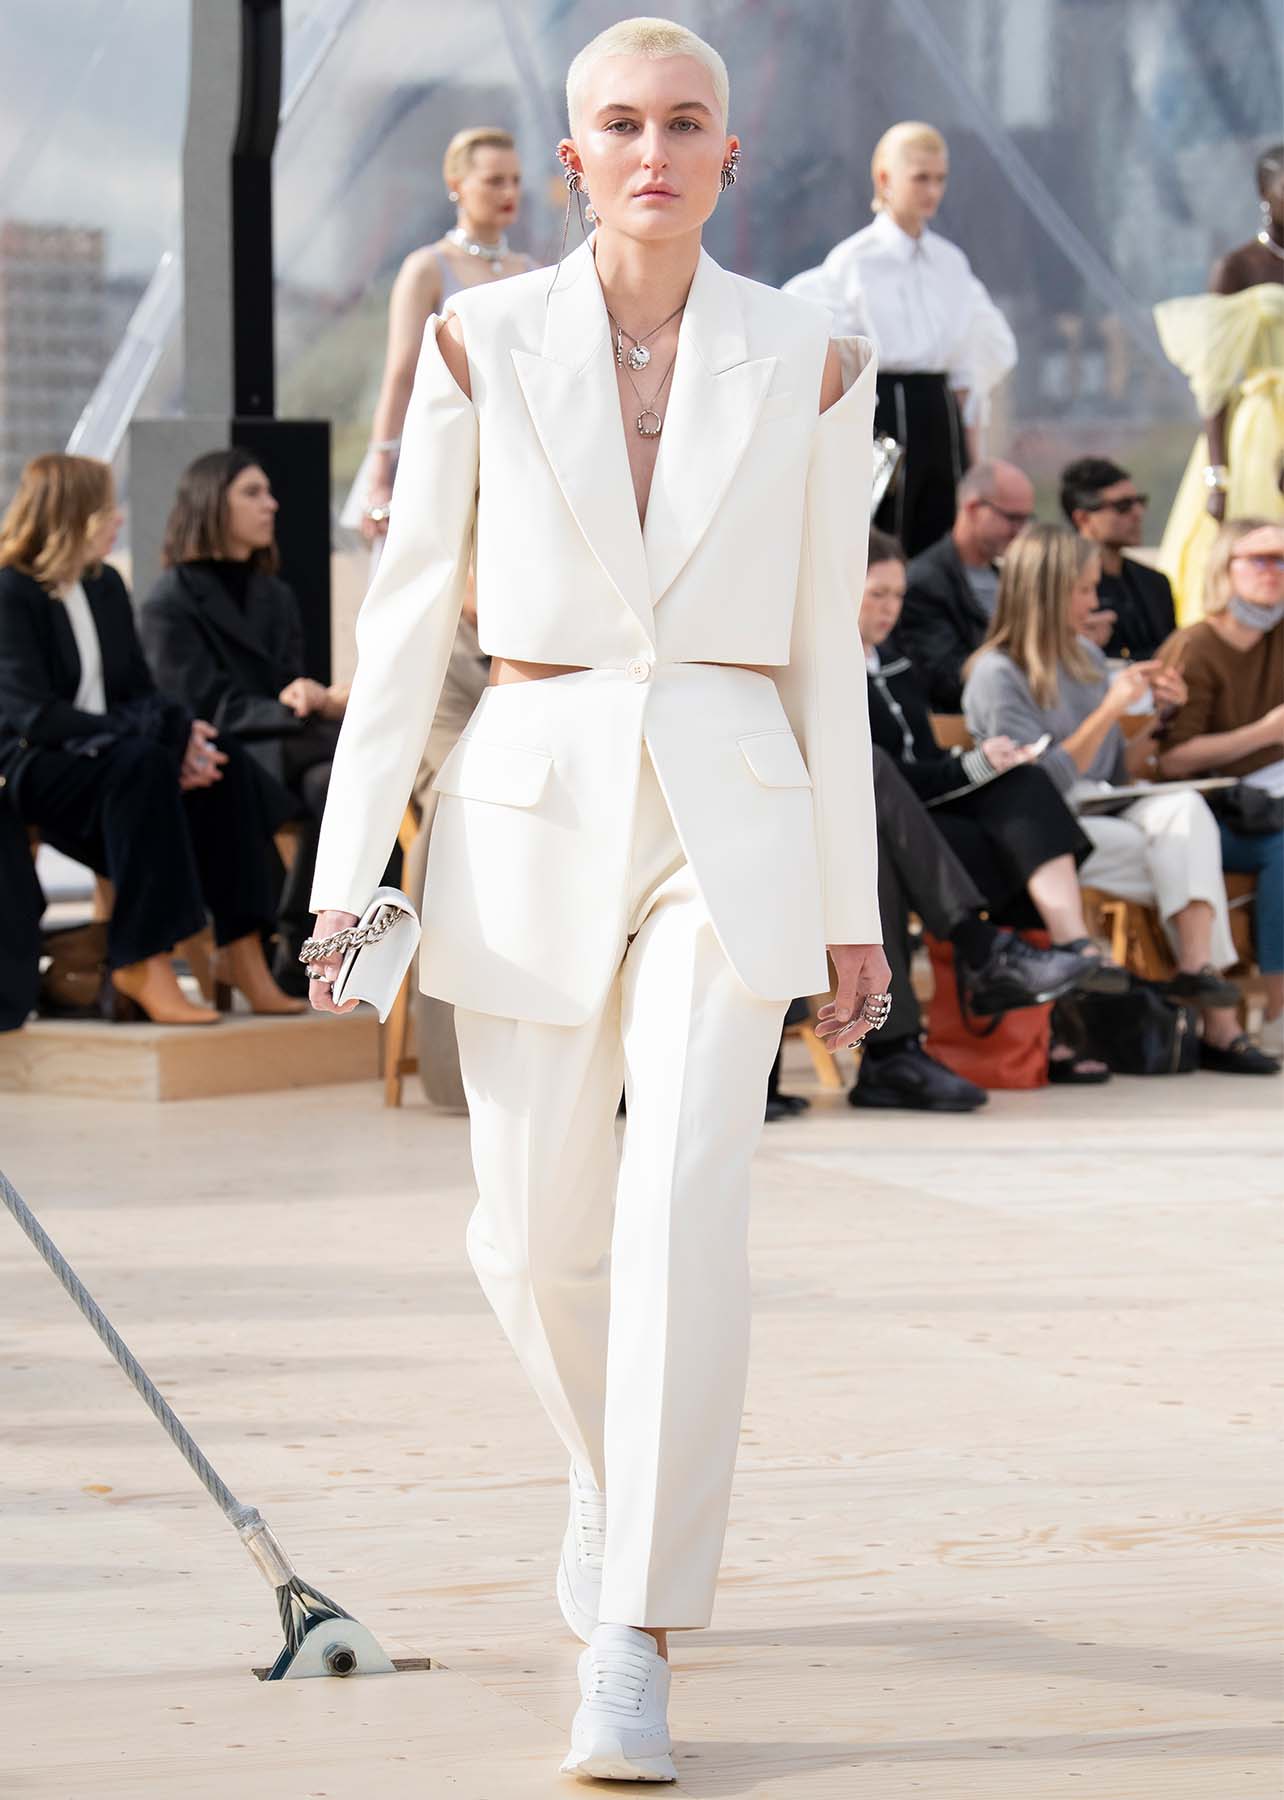 Model wears a white suit with cut outs